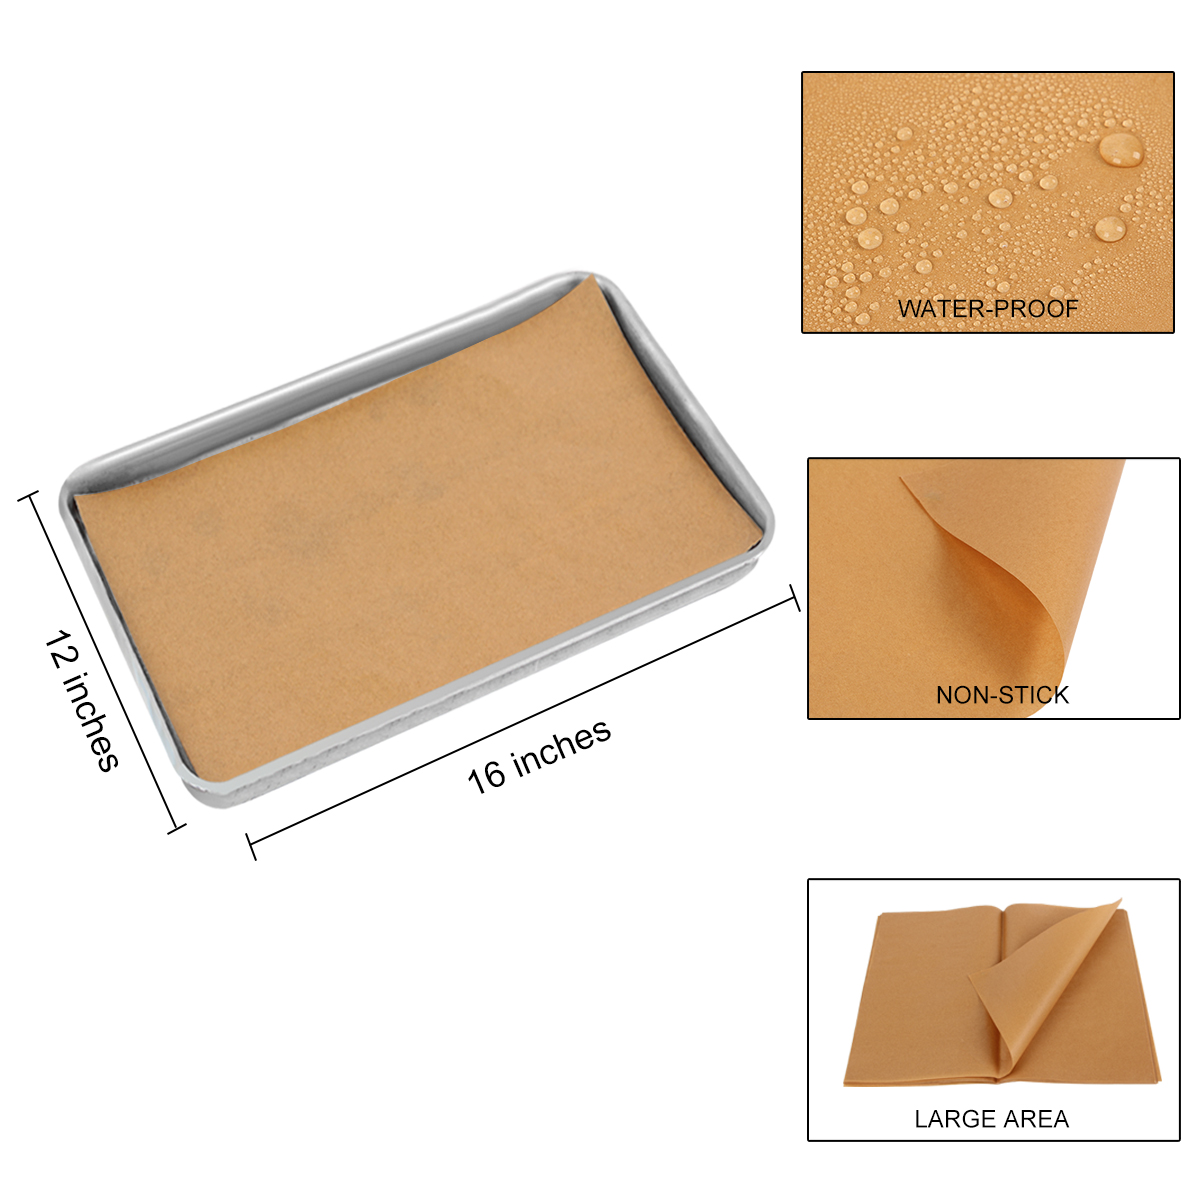 Moligh doll 200 Pcs Unbleached Parchment Paper,Non-Stick 100 Pcs 12X16 Inches Rectangle & 100 Pcs 9 Inches Round Baking Sheets for Grilling Air Fryer Steaming Bread Cake Cookie Unbleached